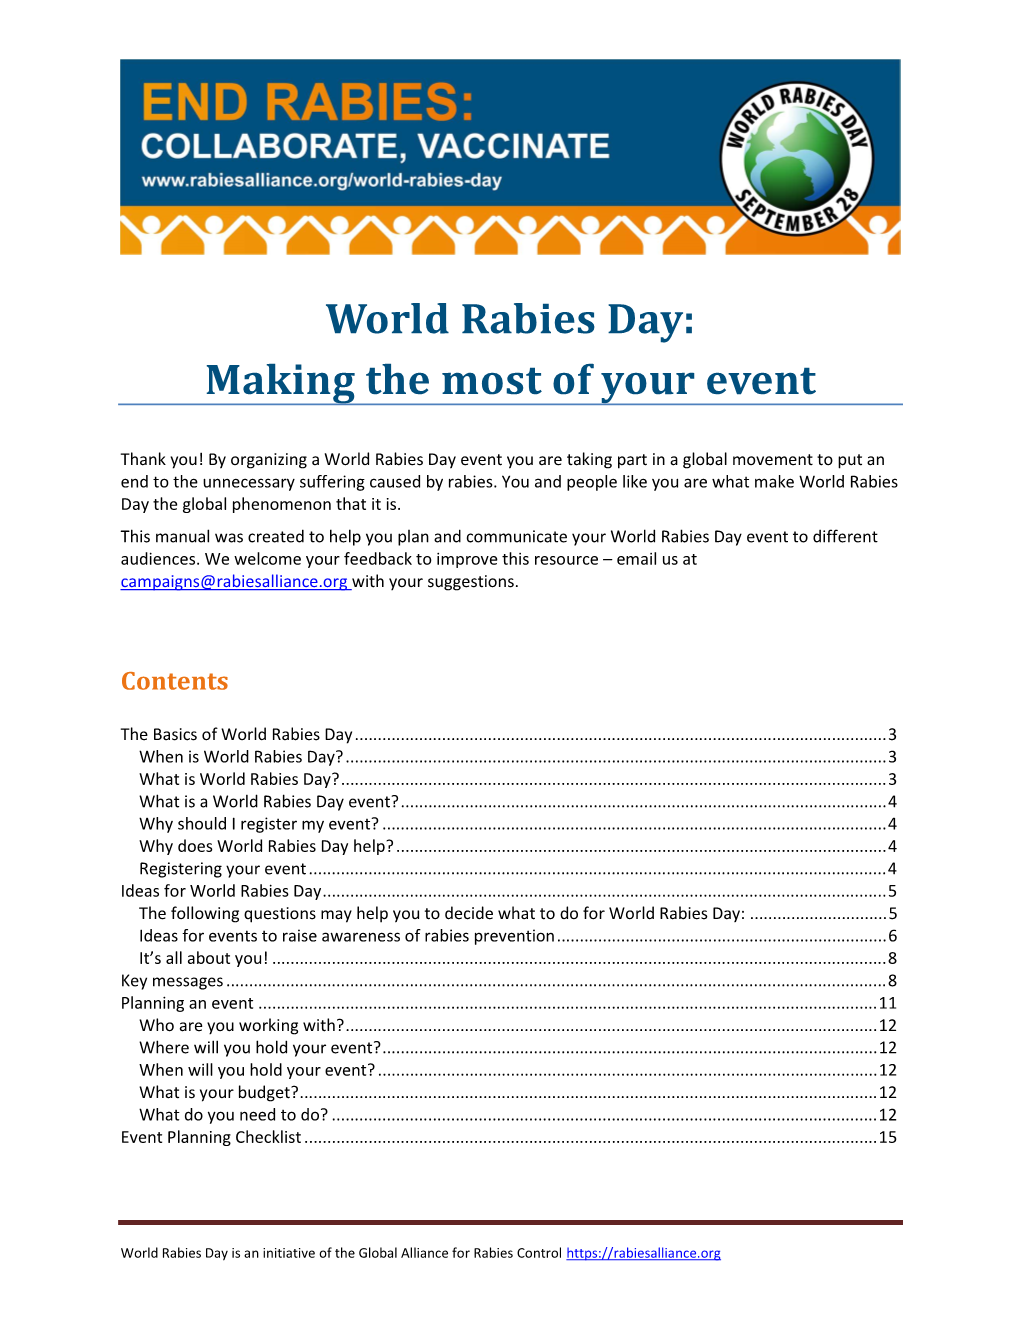 World Rabies Day: Making the Most of Your Event